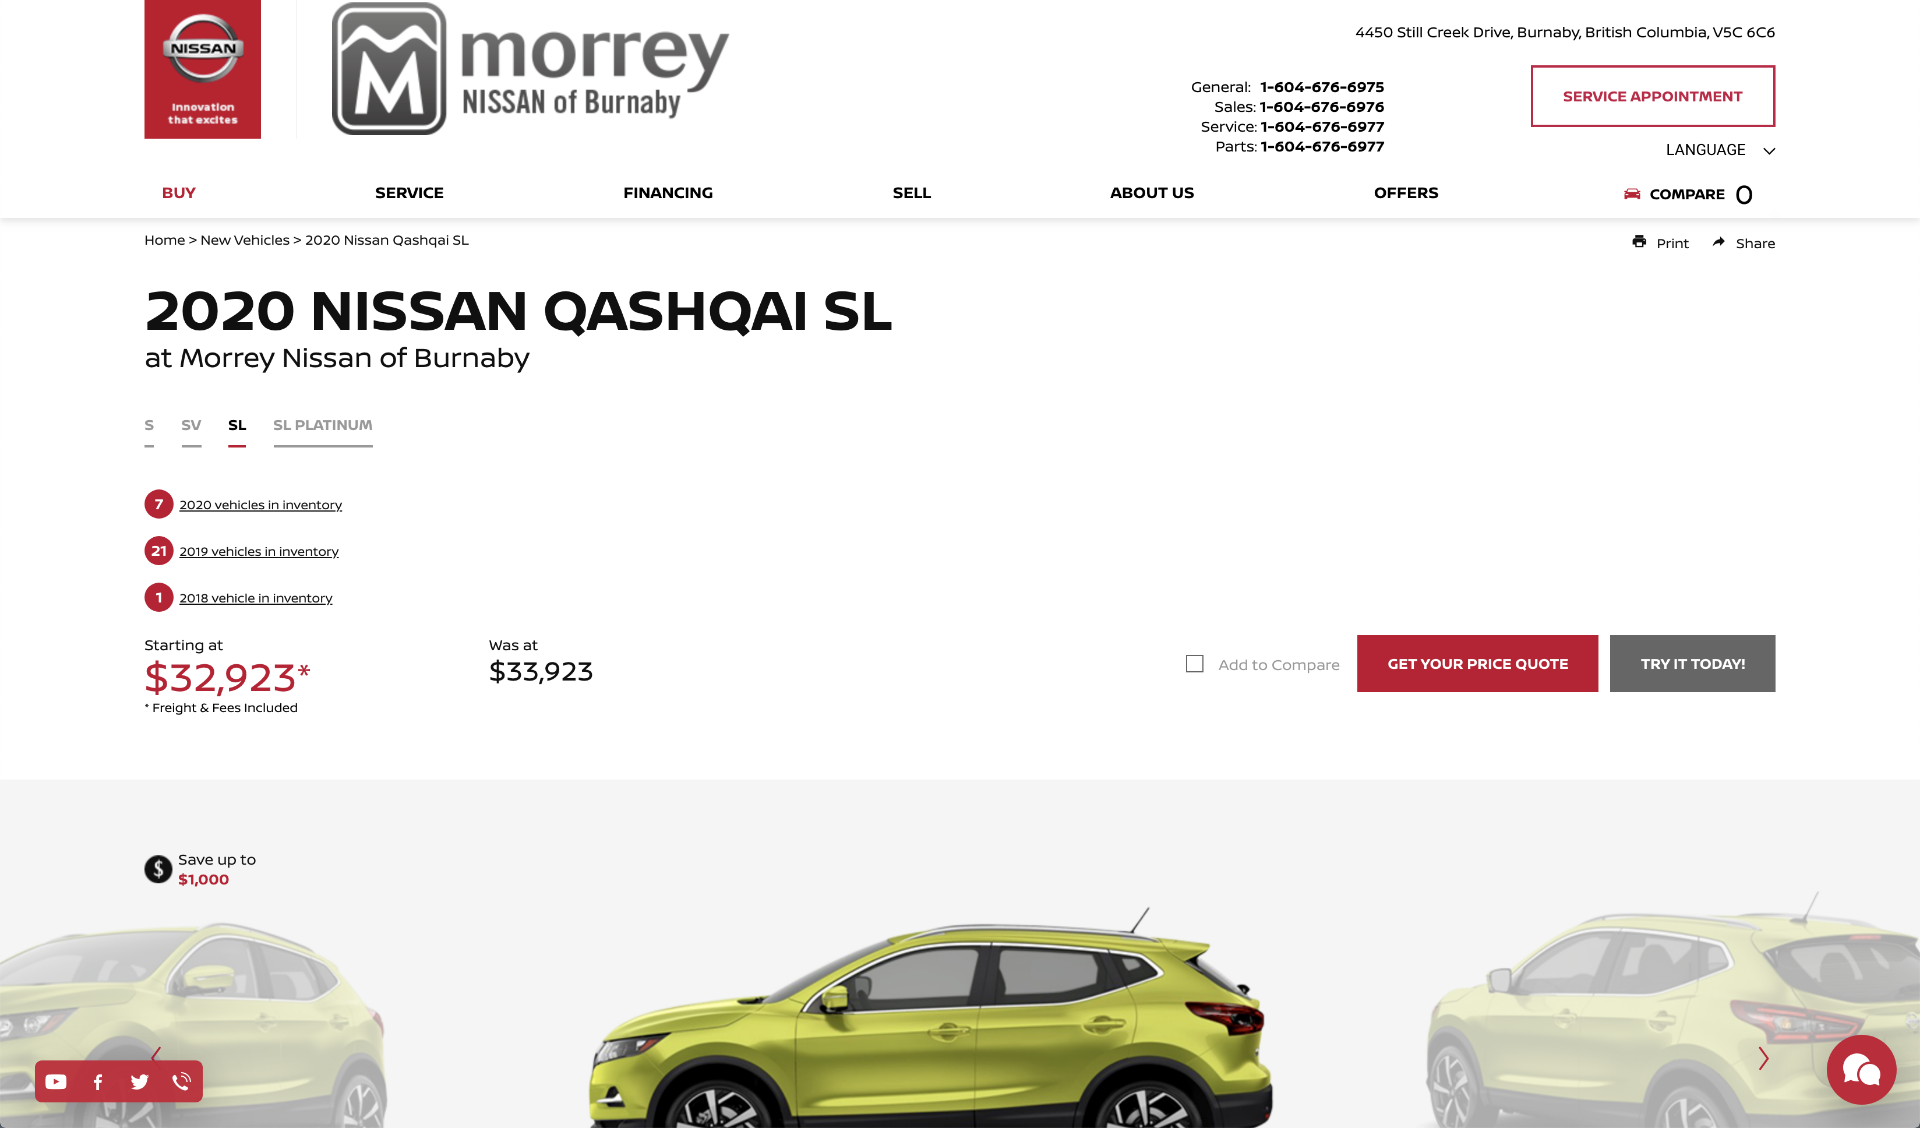 How to configure a new Nissan 2020 vehicle on our site